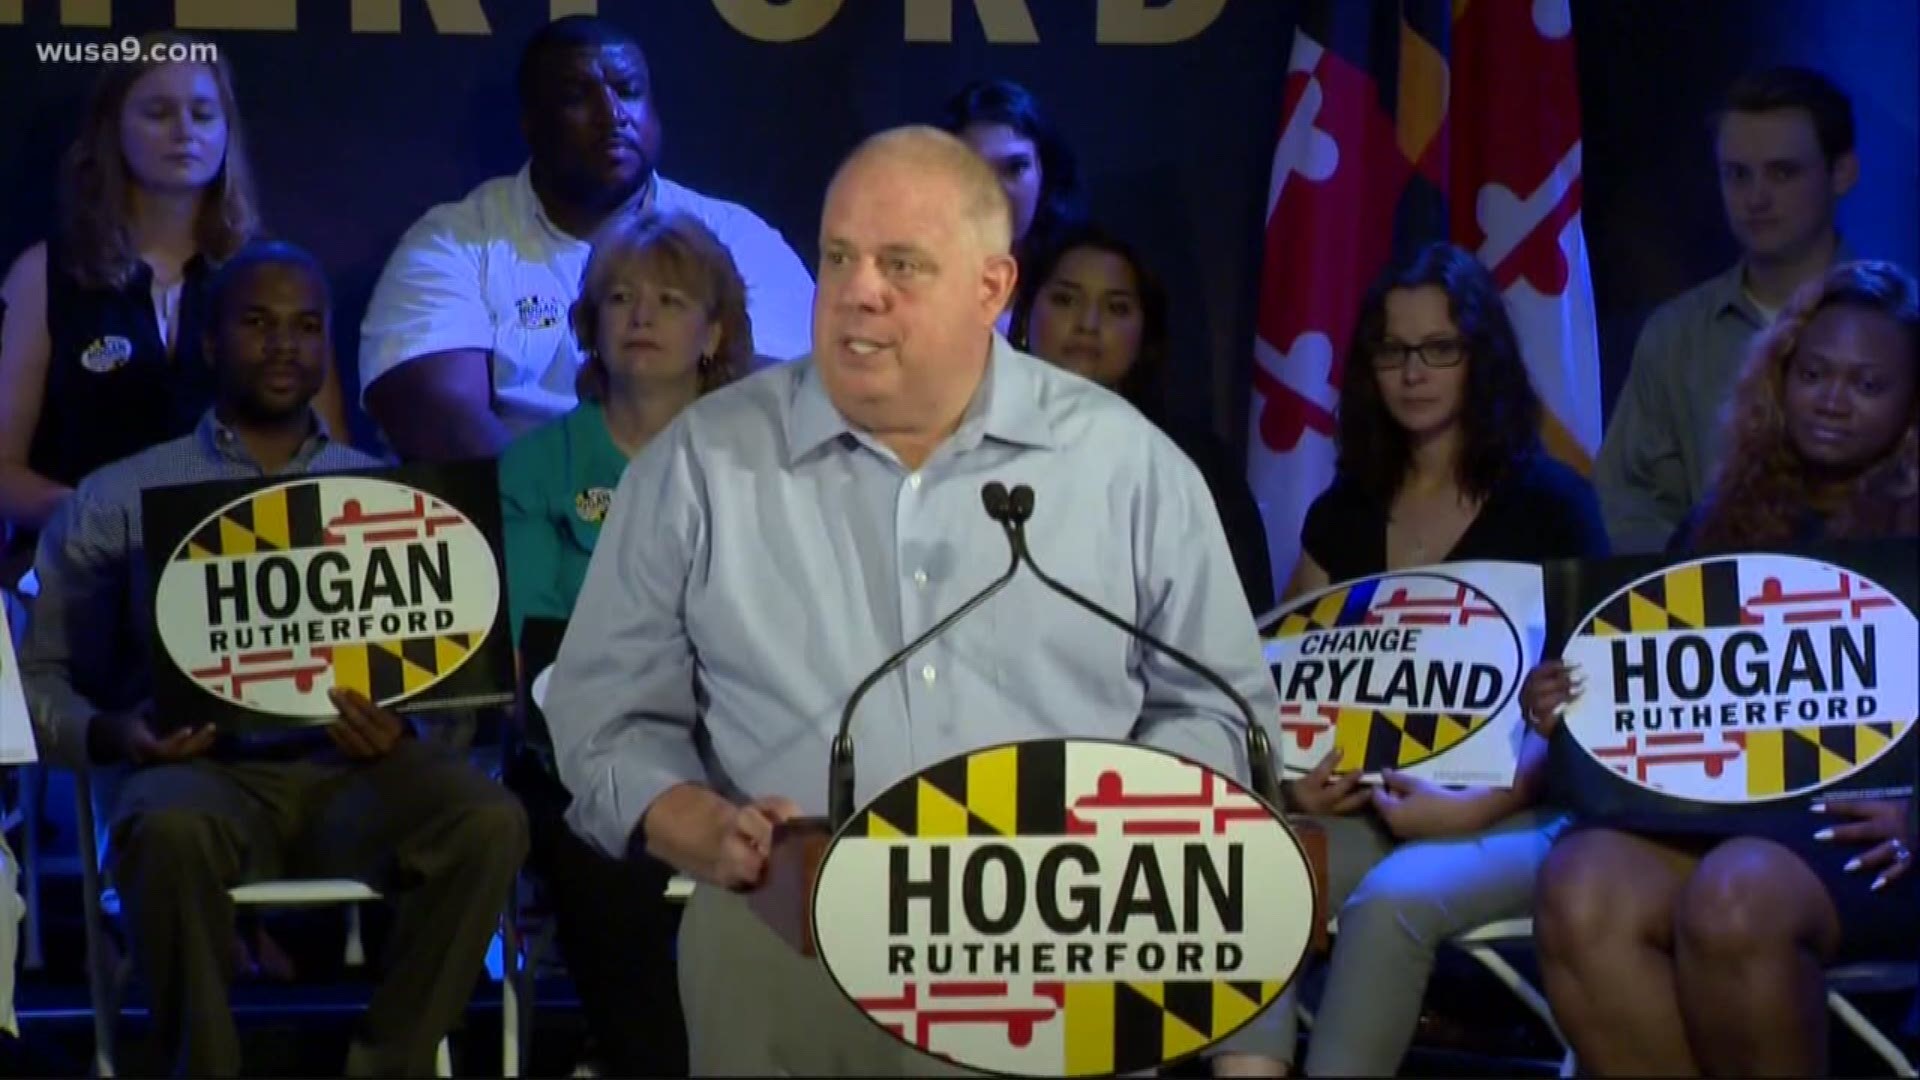 After a lot of speculation, Maryland Governor Larry Hogan now says he won't challenge President  Trump for the GOP nomination in 2020. Hogan, who was elected to his second term last fall, says in a Washington Post interview that "I'm not going to be a candidate for president in 2020."